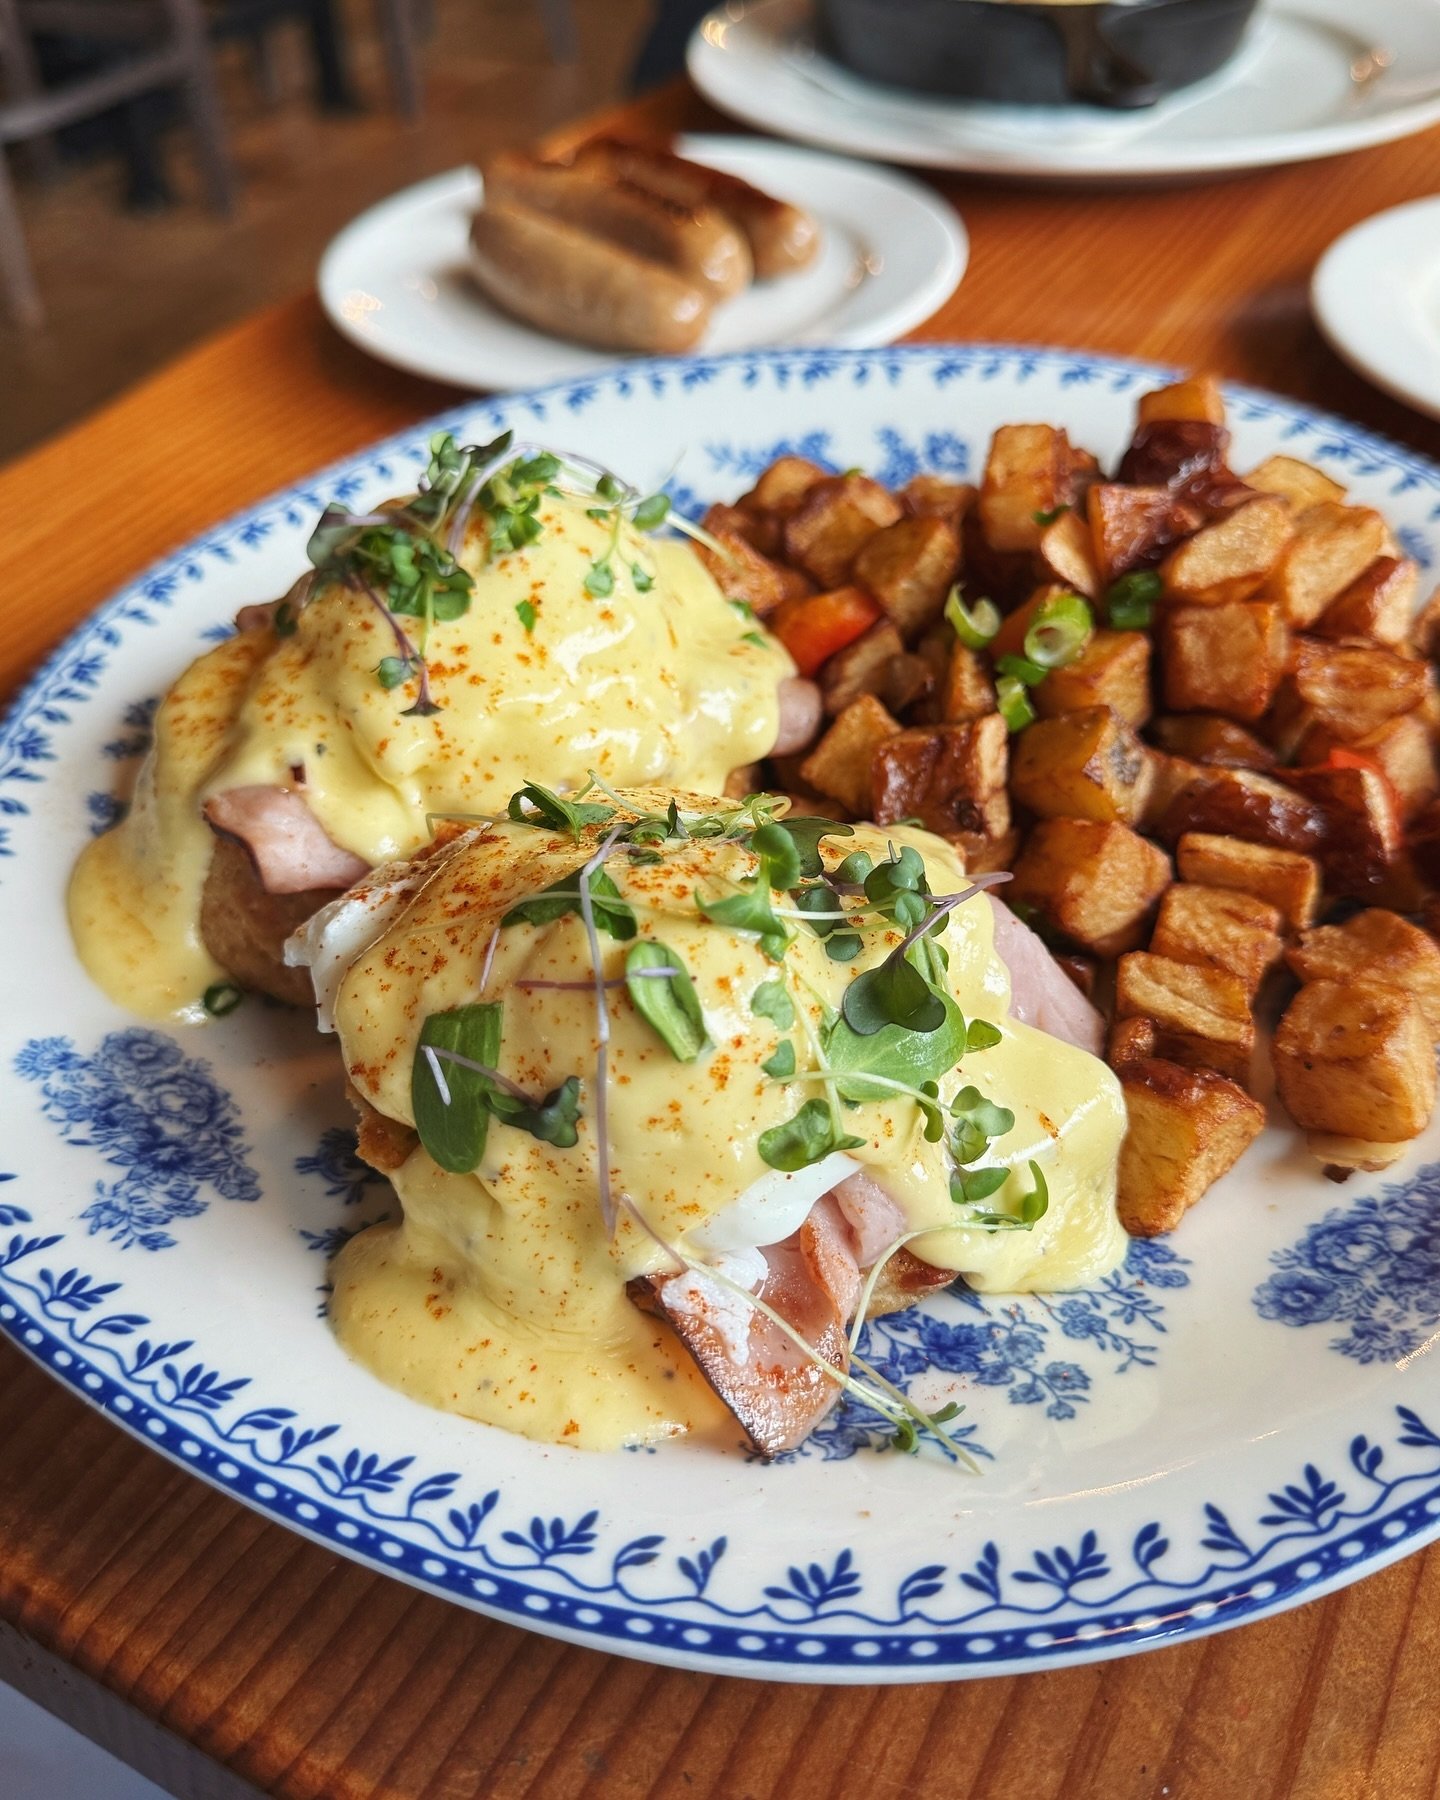 It&rsquo;s nothing revolutionary, but it&rsquo;s just so good. Our ham benedict is a go-to around here for a reason.